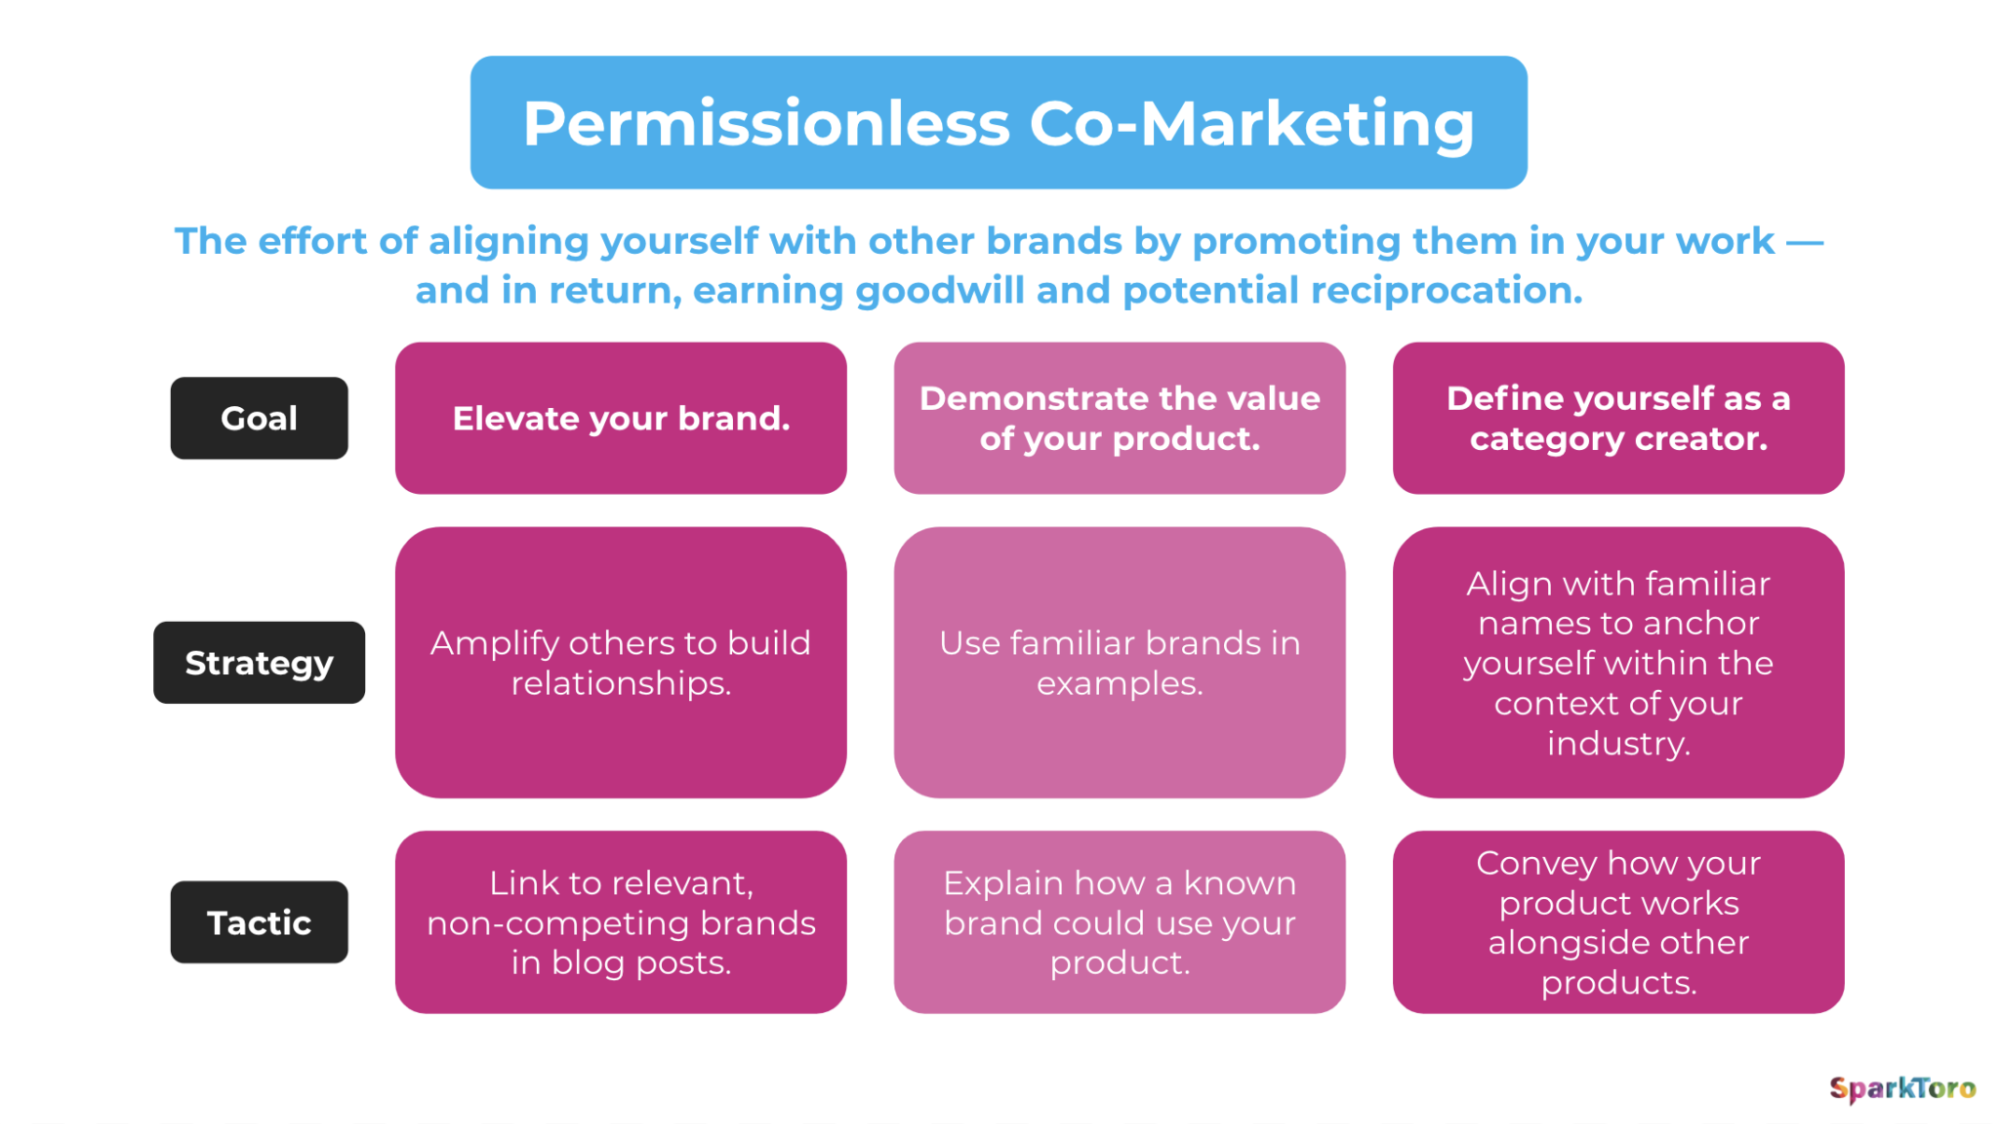 infographic from SparkToro about permissionless comarketing